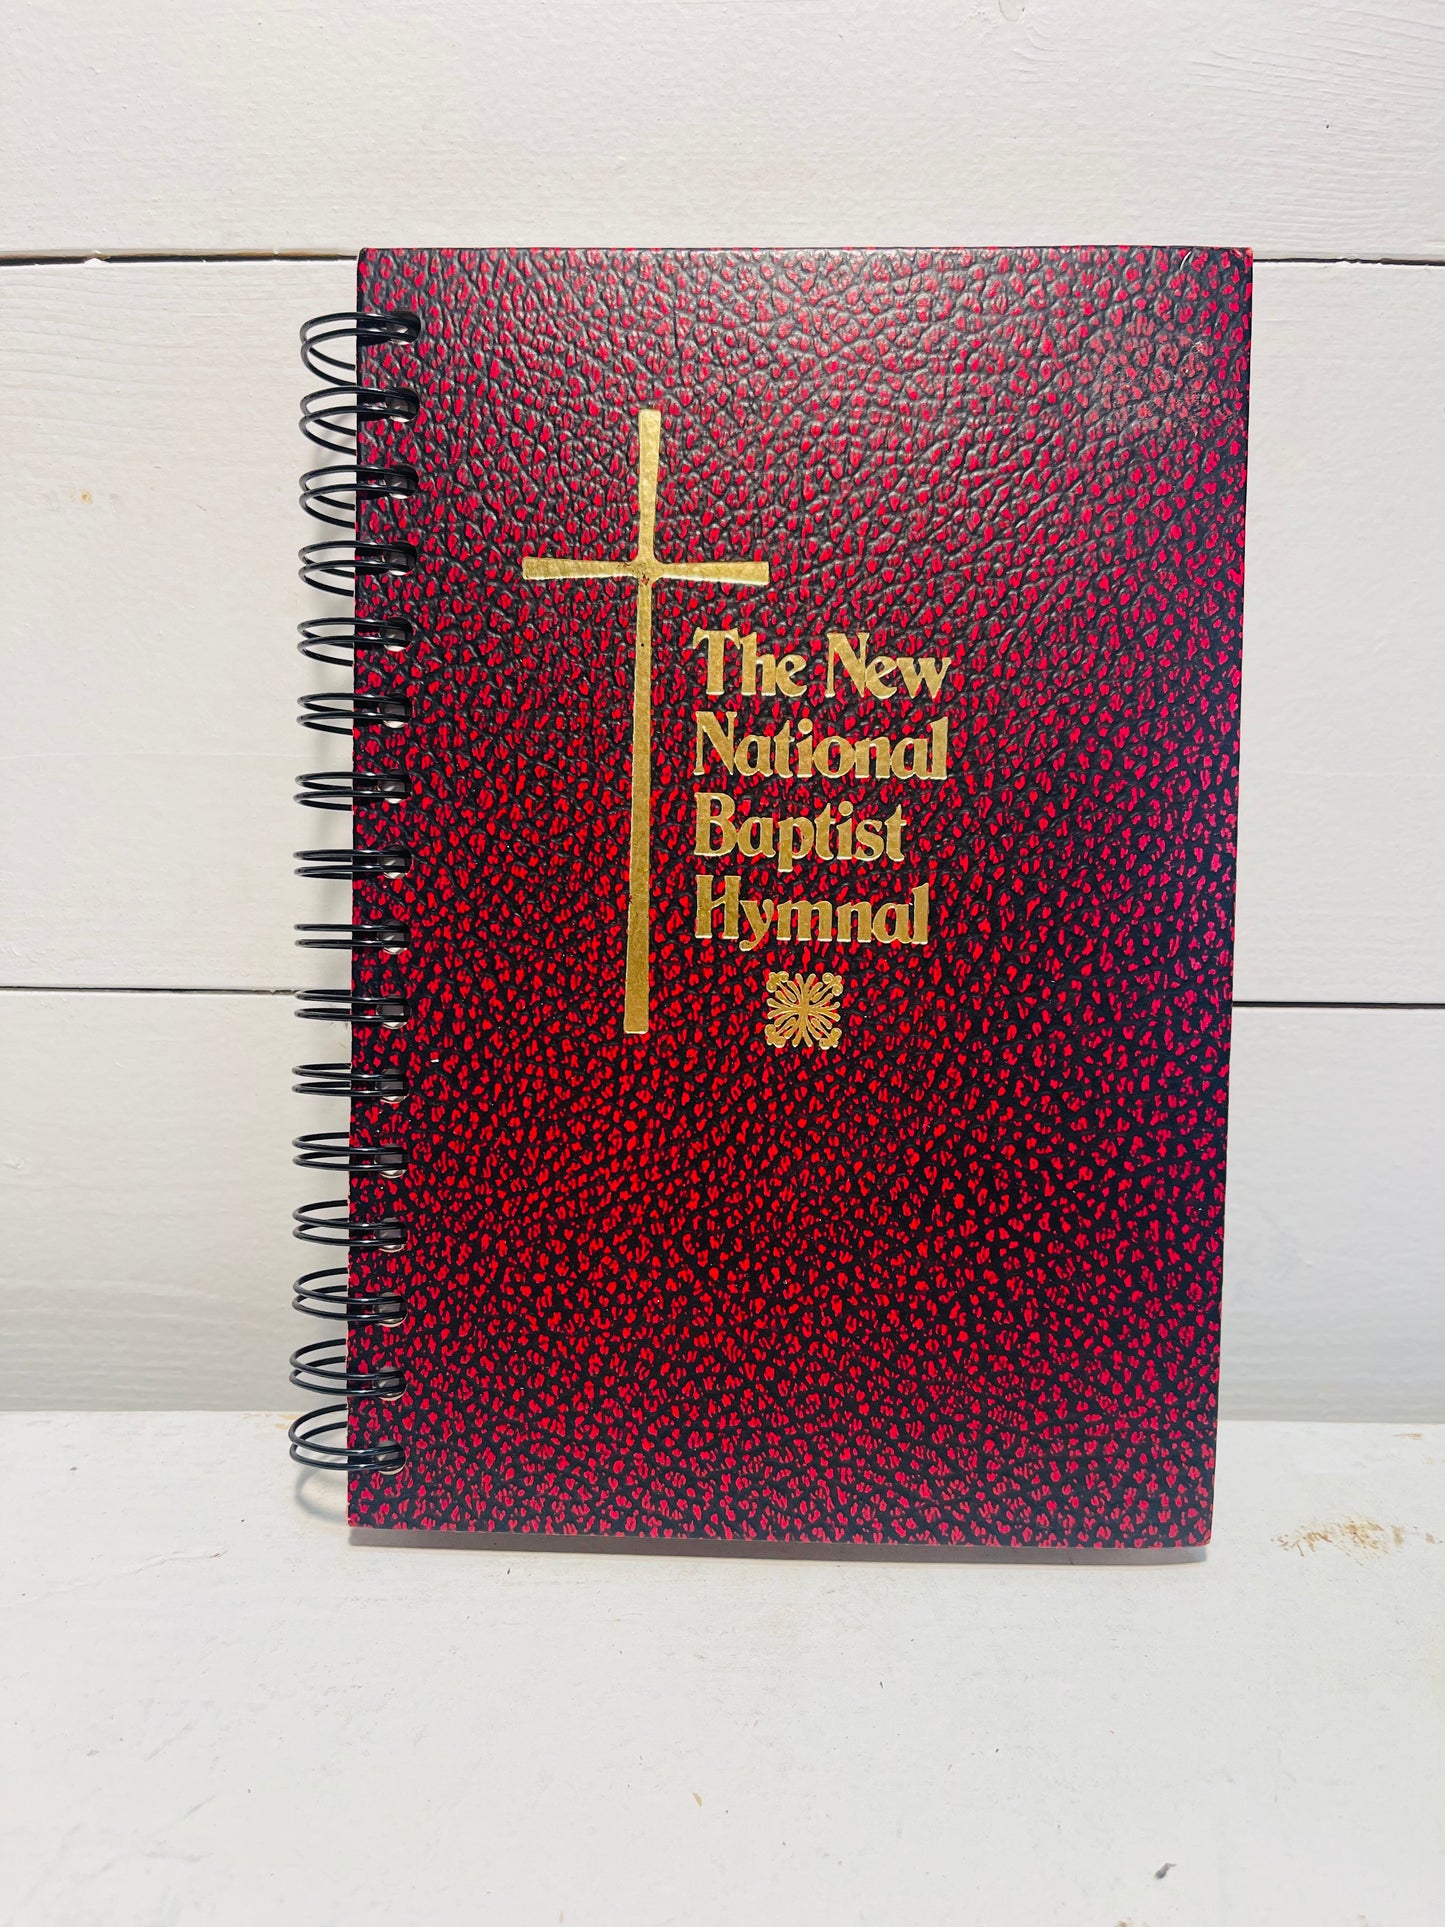 The New National Baptist Hymnal